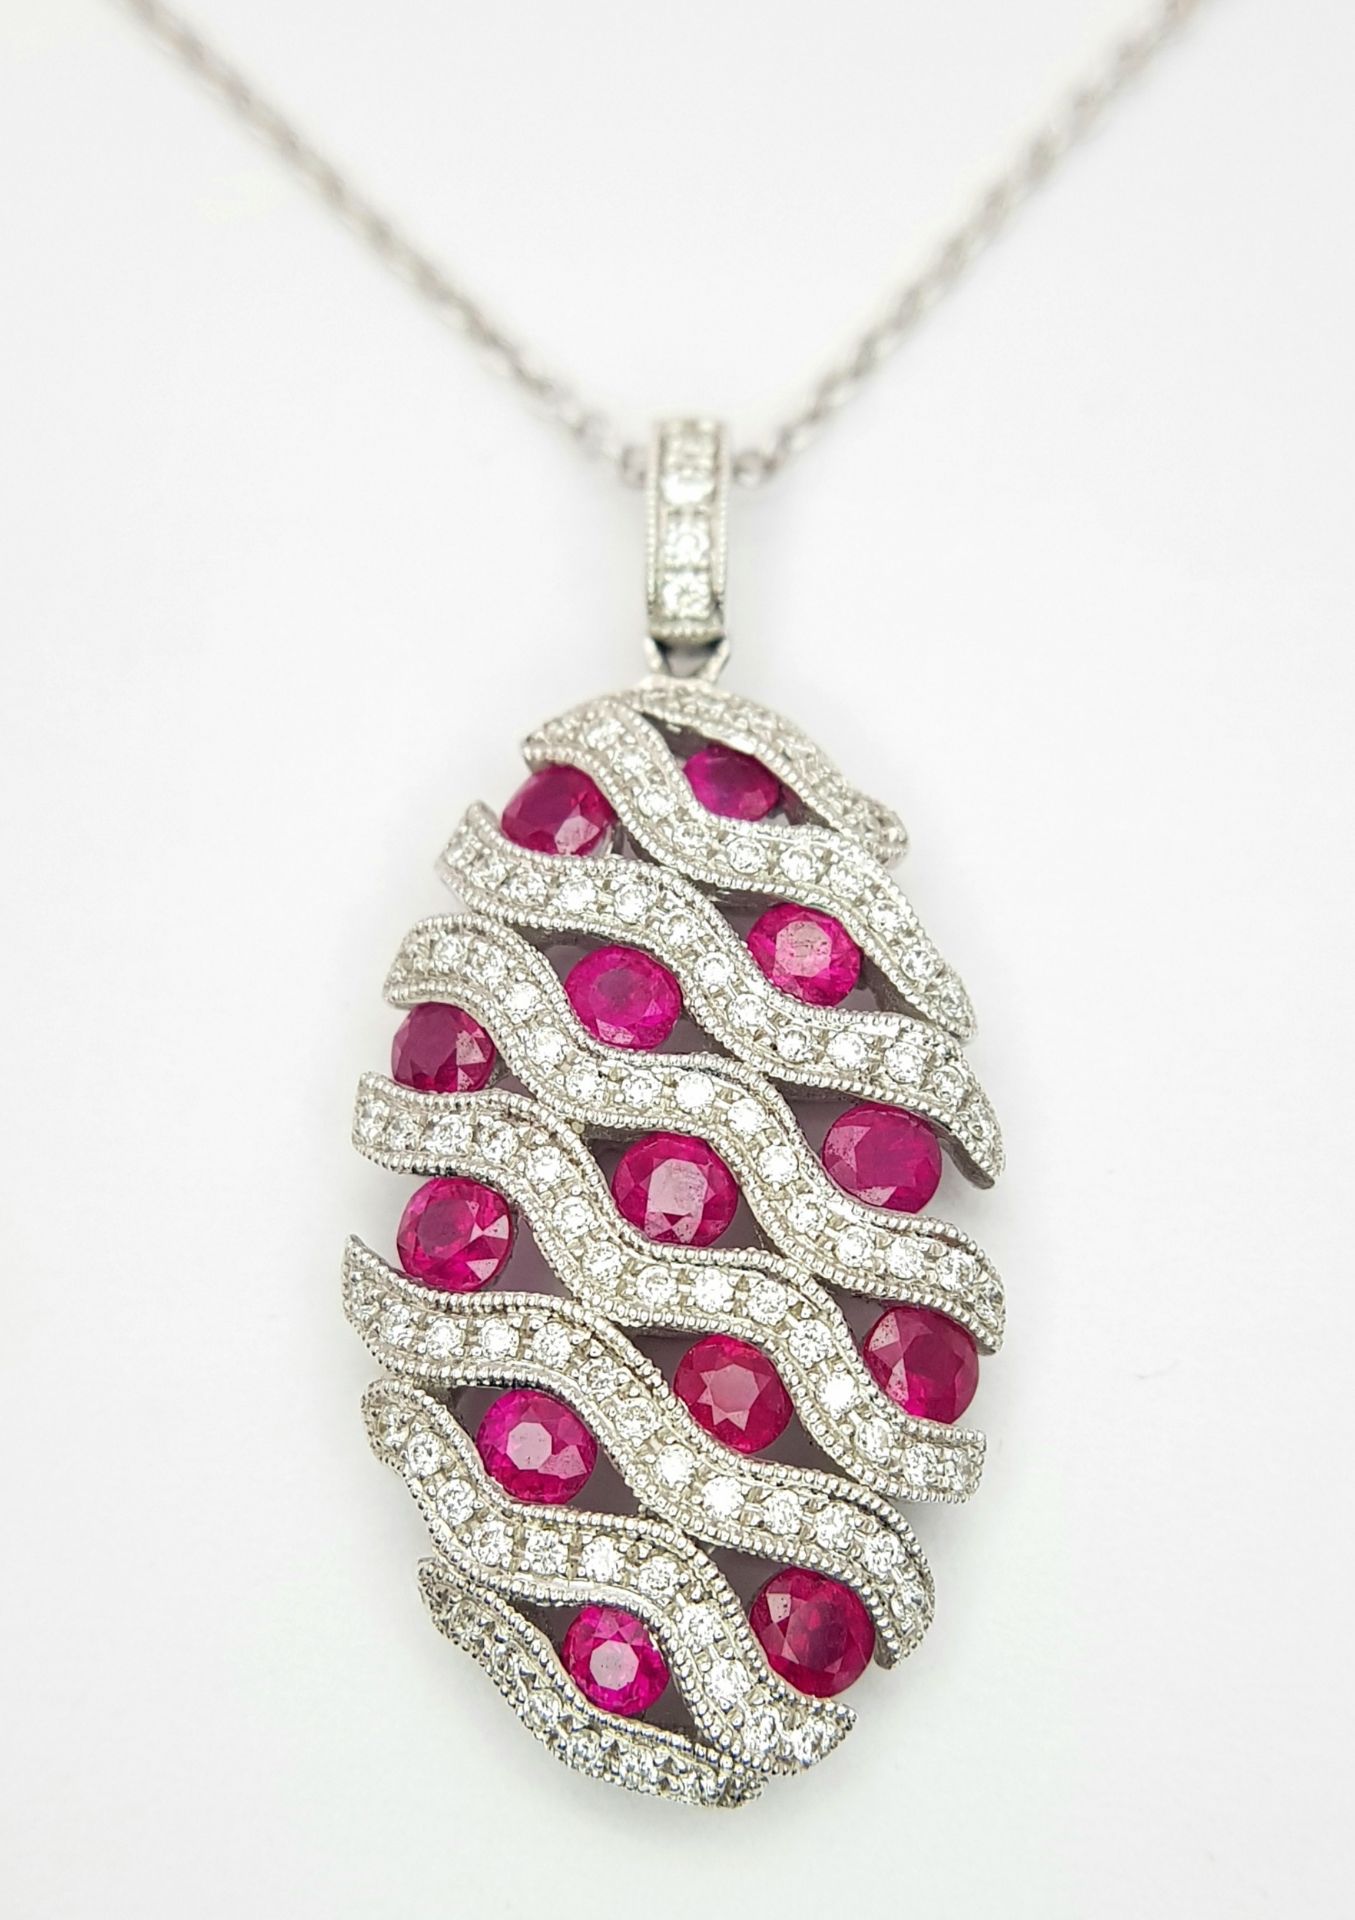 AN 18K WHITE GOLD DIAMOND AND RUBY PENDANT - 0.49CT OF DIAMONDS AND 2.29CT OF RUBIES. 6.2G WEIGHT. - Bild 2 aus 16